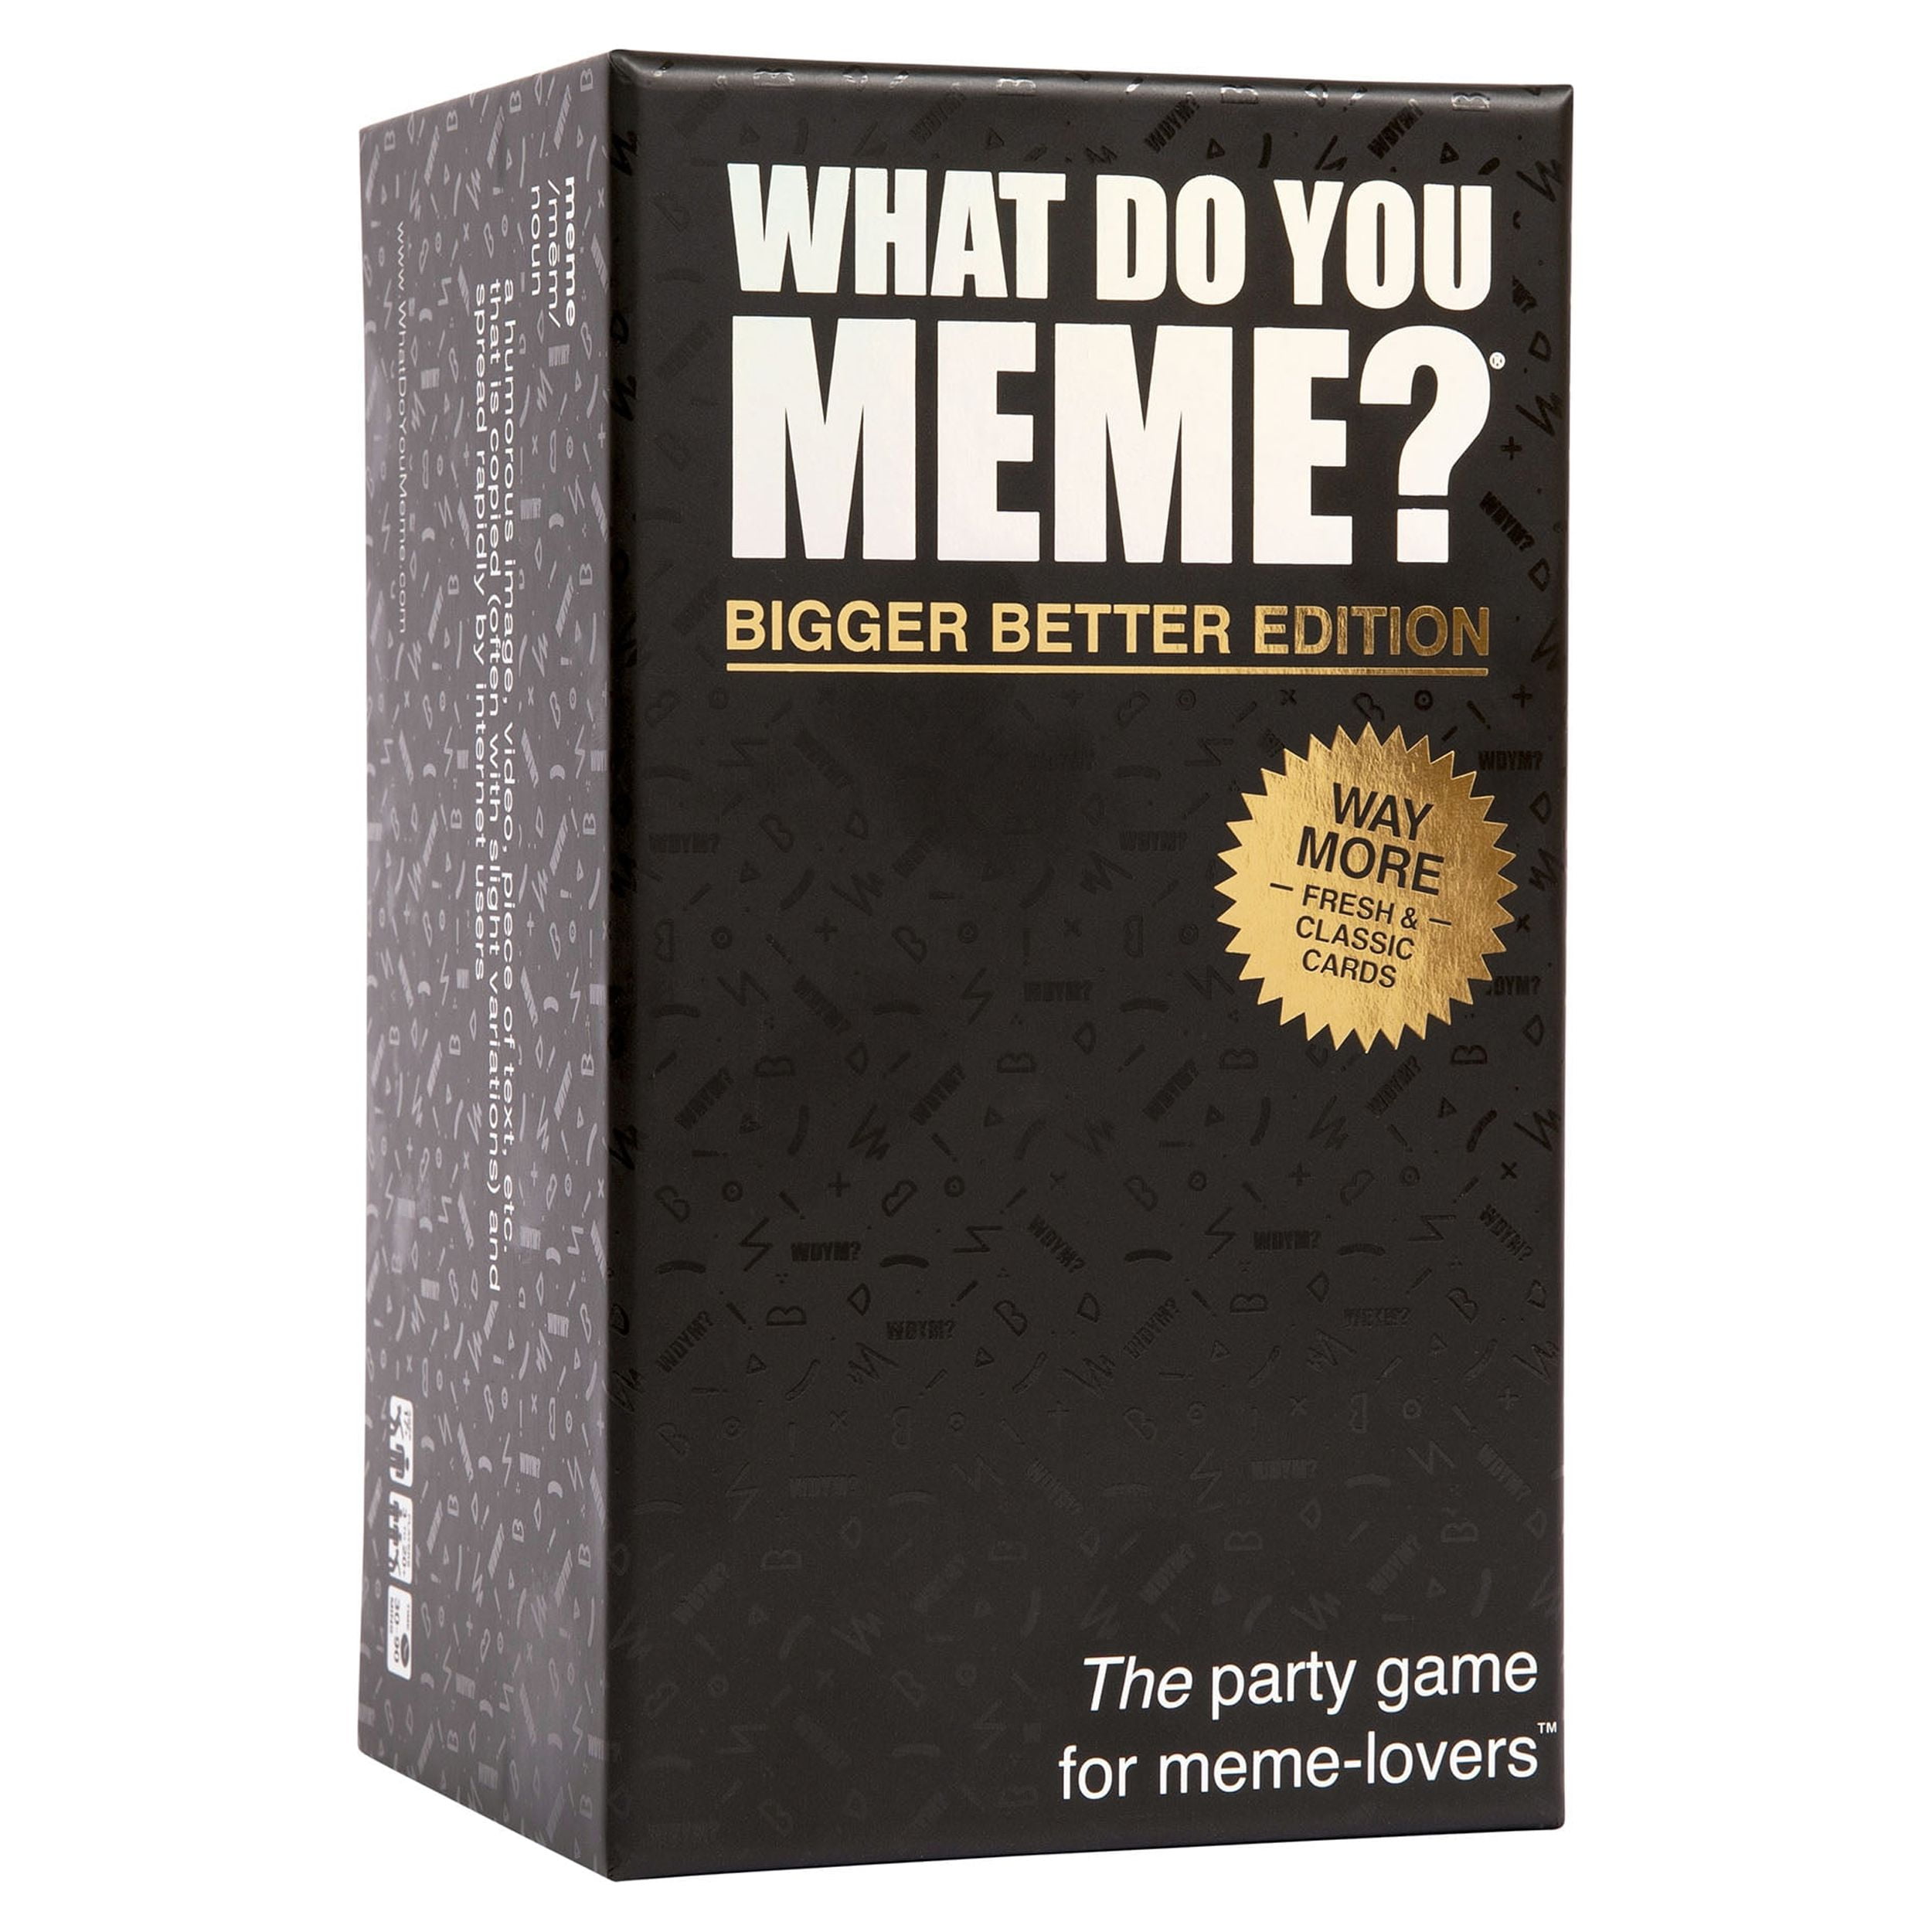 How to Play What Do You Meme? Party Game Instructions